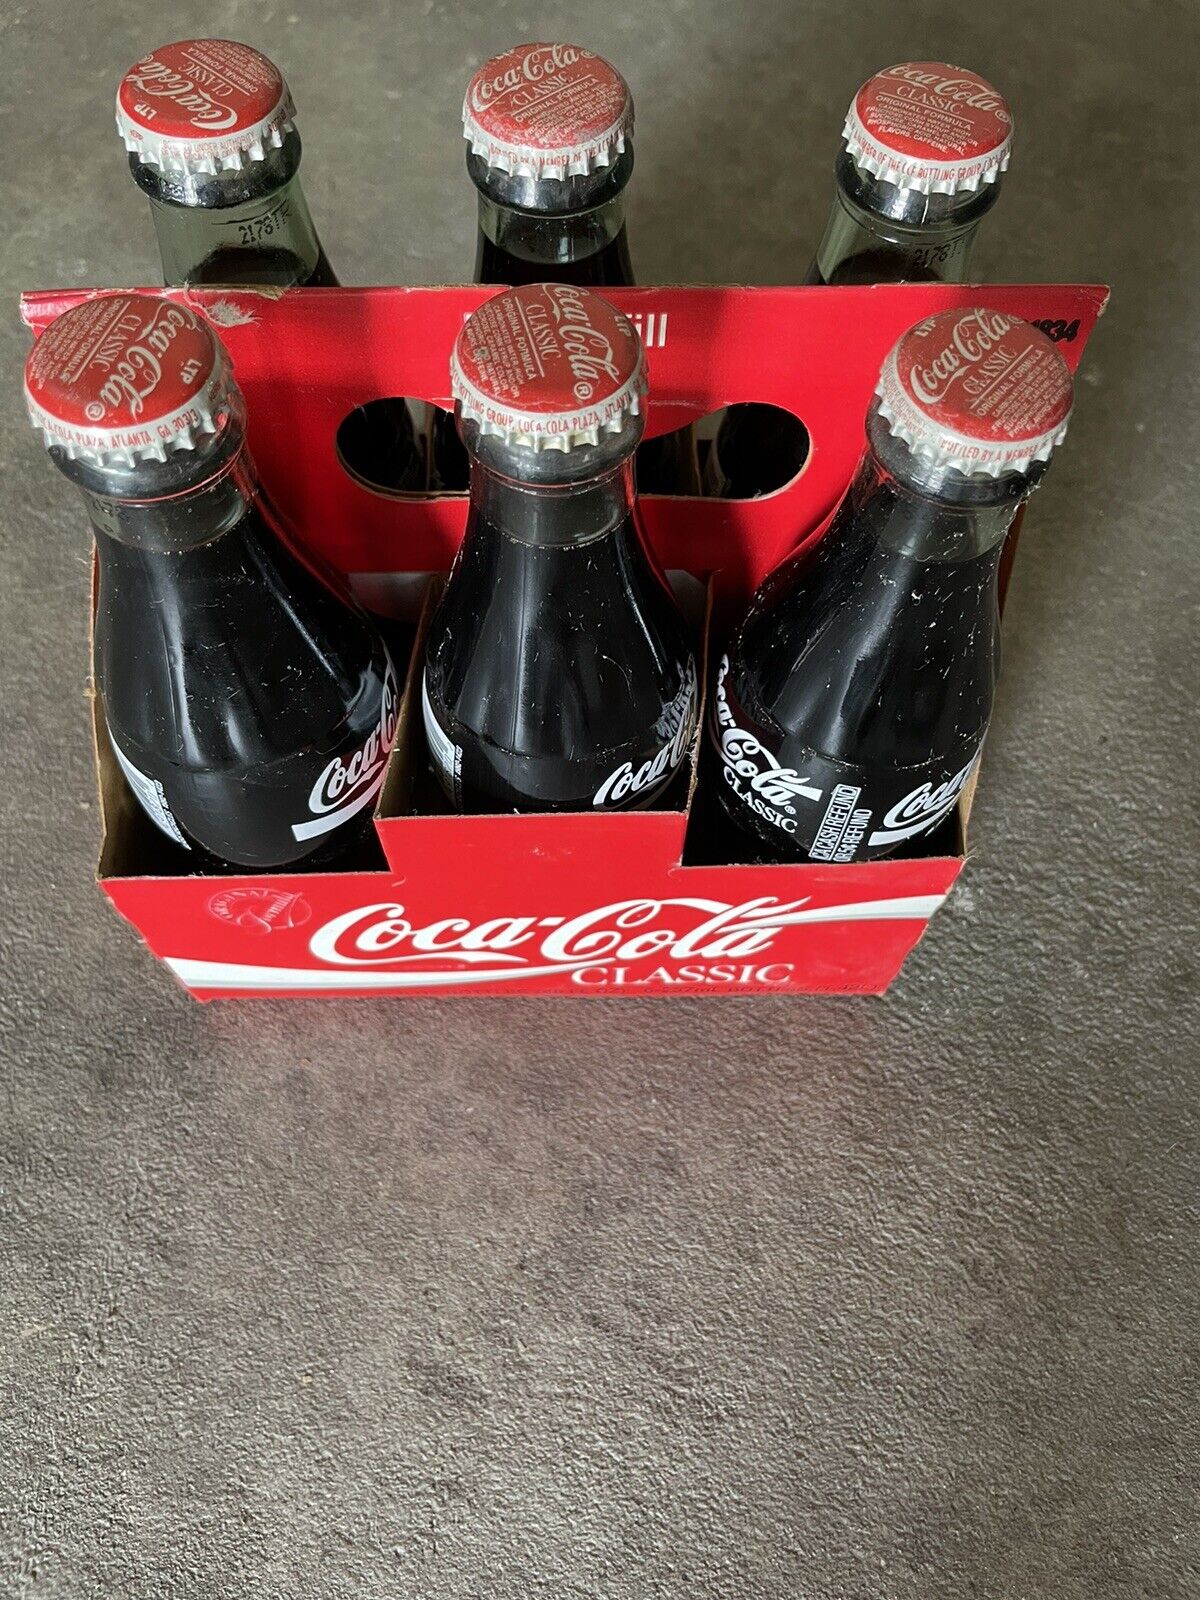 Rare Vintage 1986 Coca Cola Bottles Unopened In Carrier 6 Pack Coke Classic